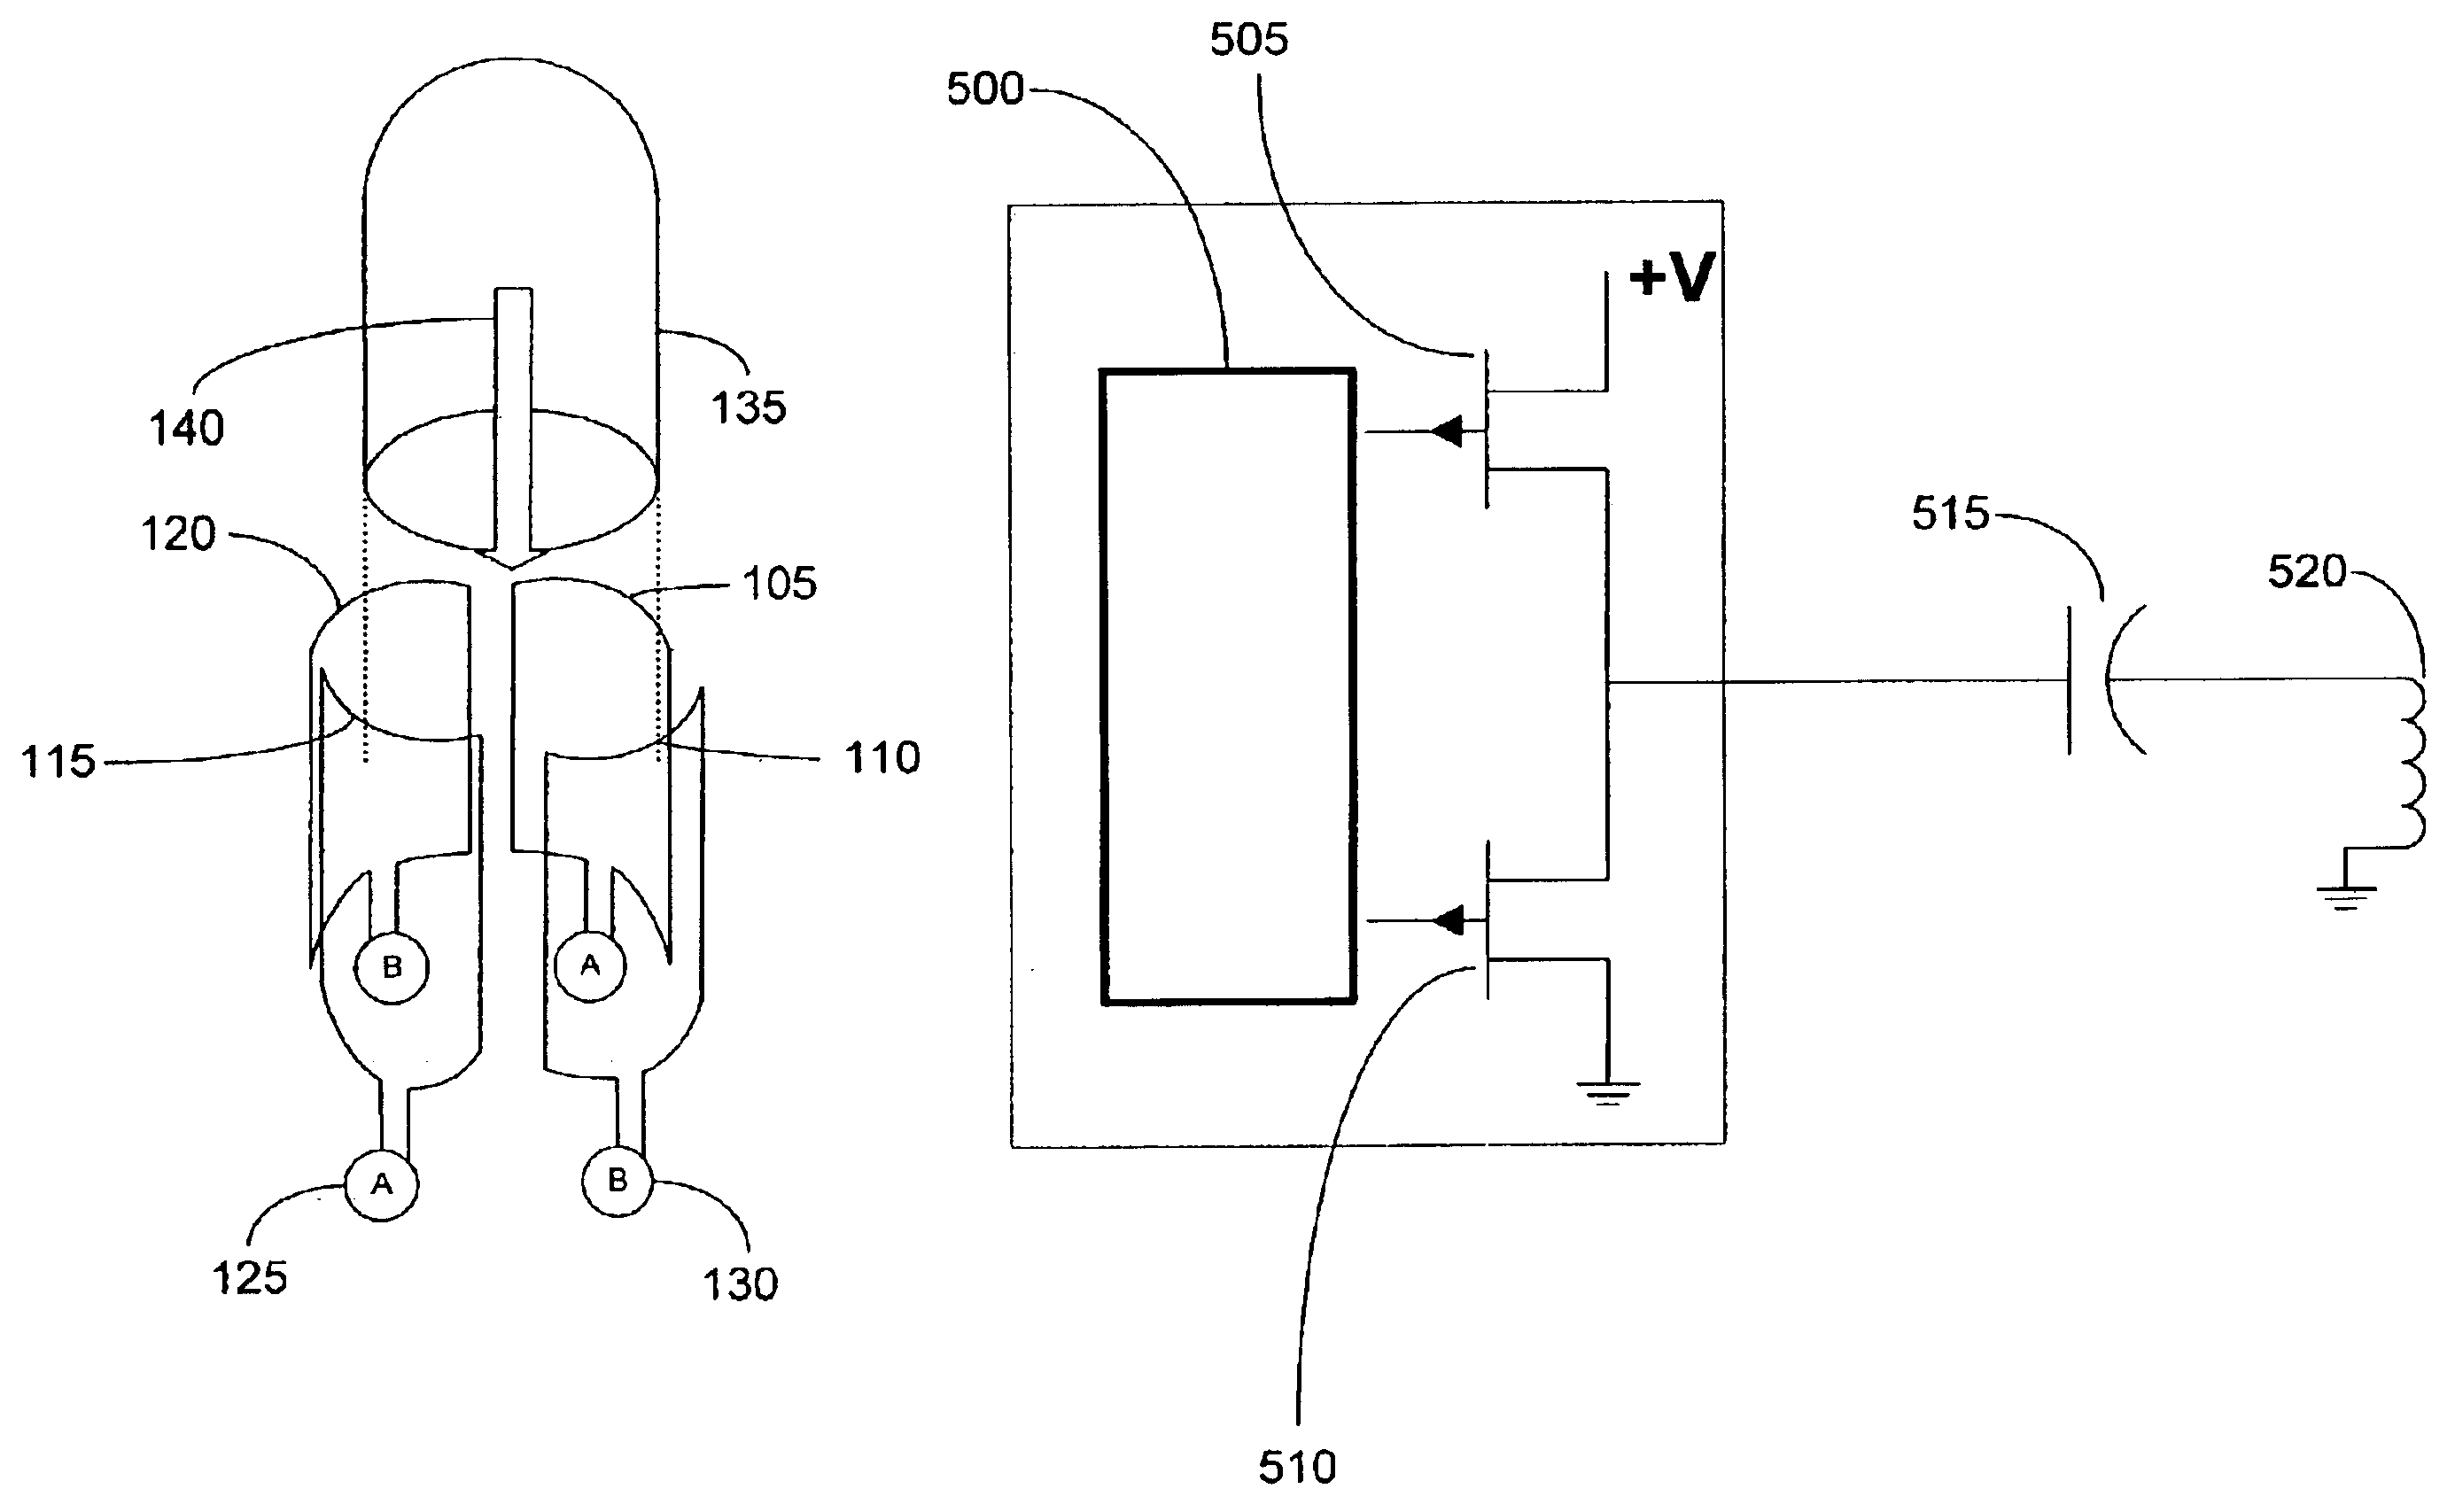 Plasma production device and method and RF driver circuit with adjustable duty cycle